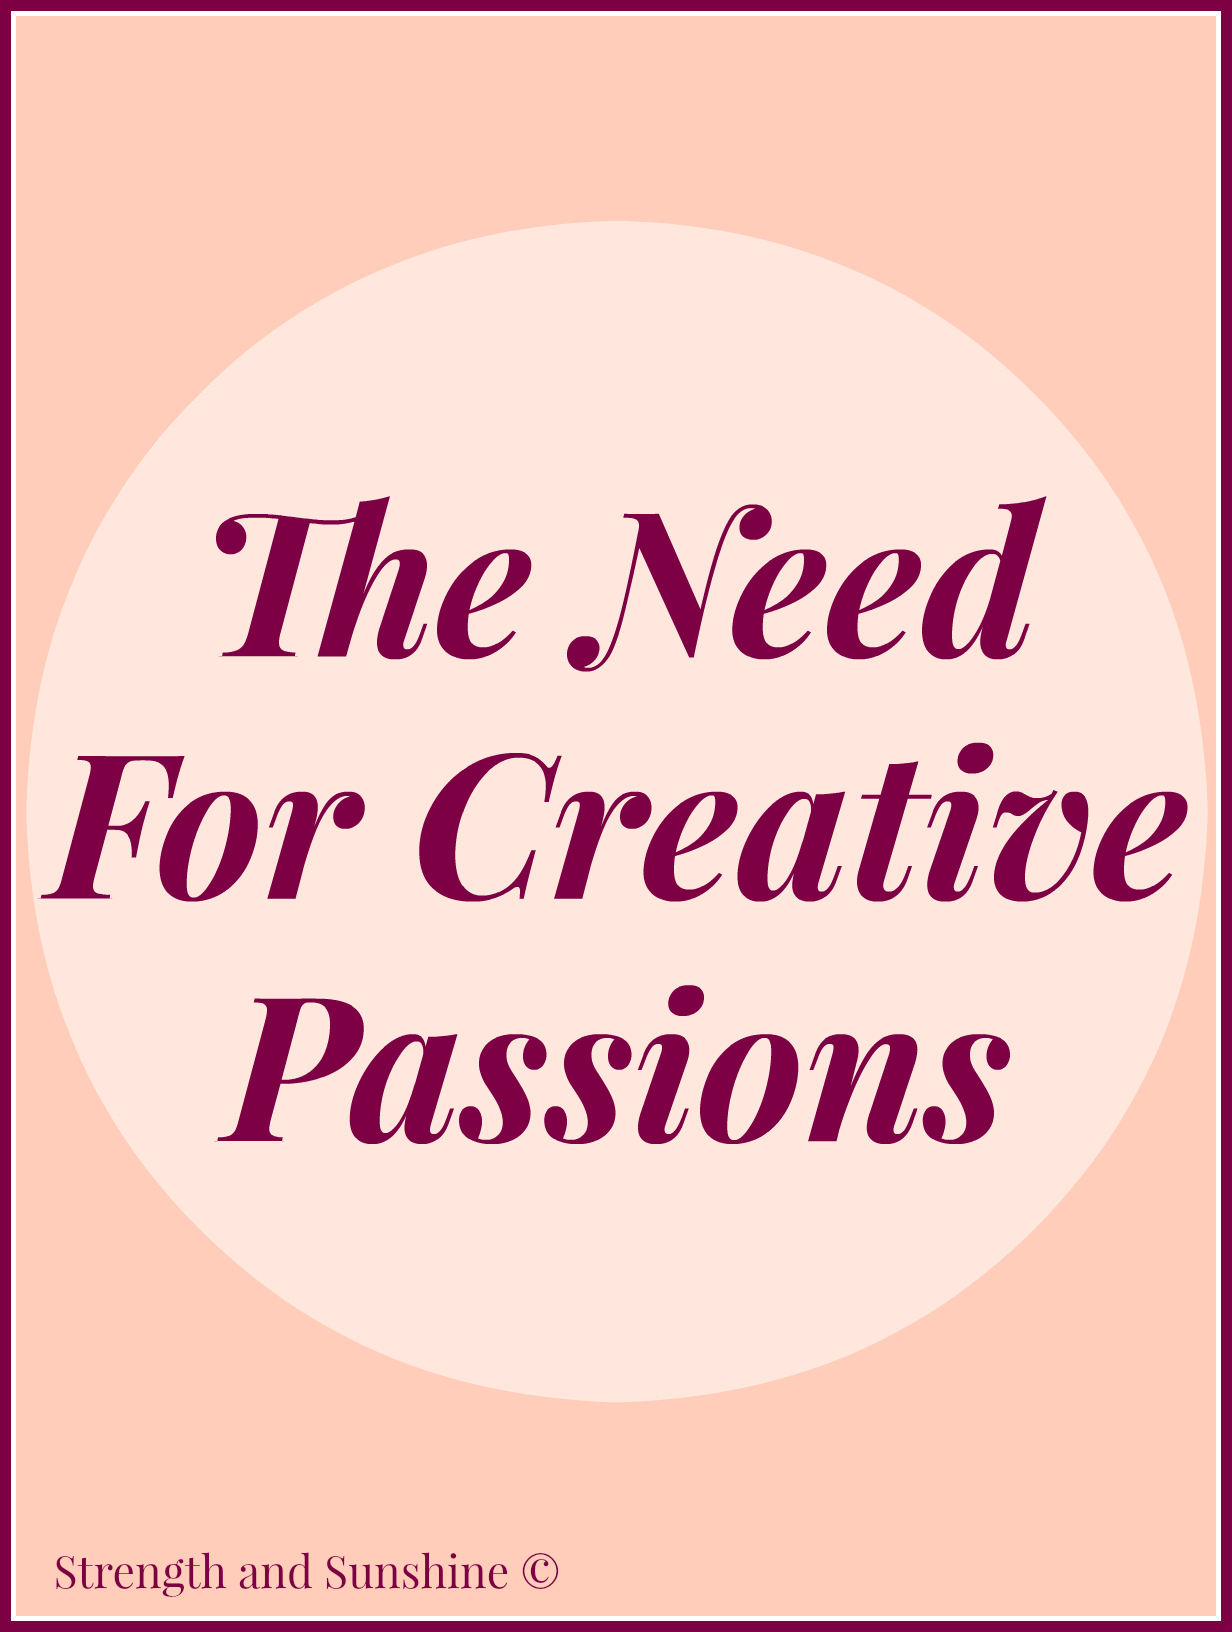 The Need For Creative Passions | Strength and Sunshine @RebeccaGF666